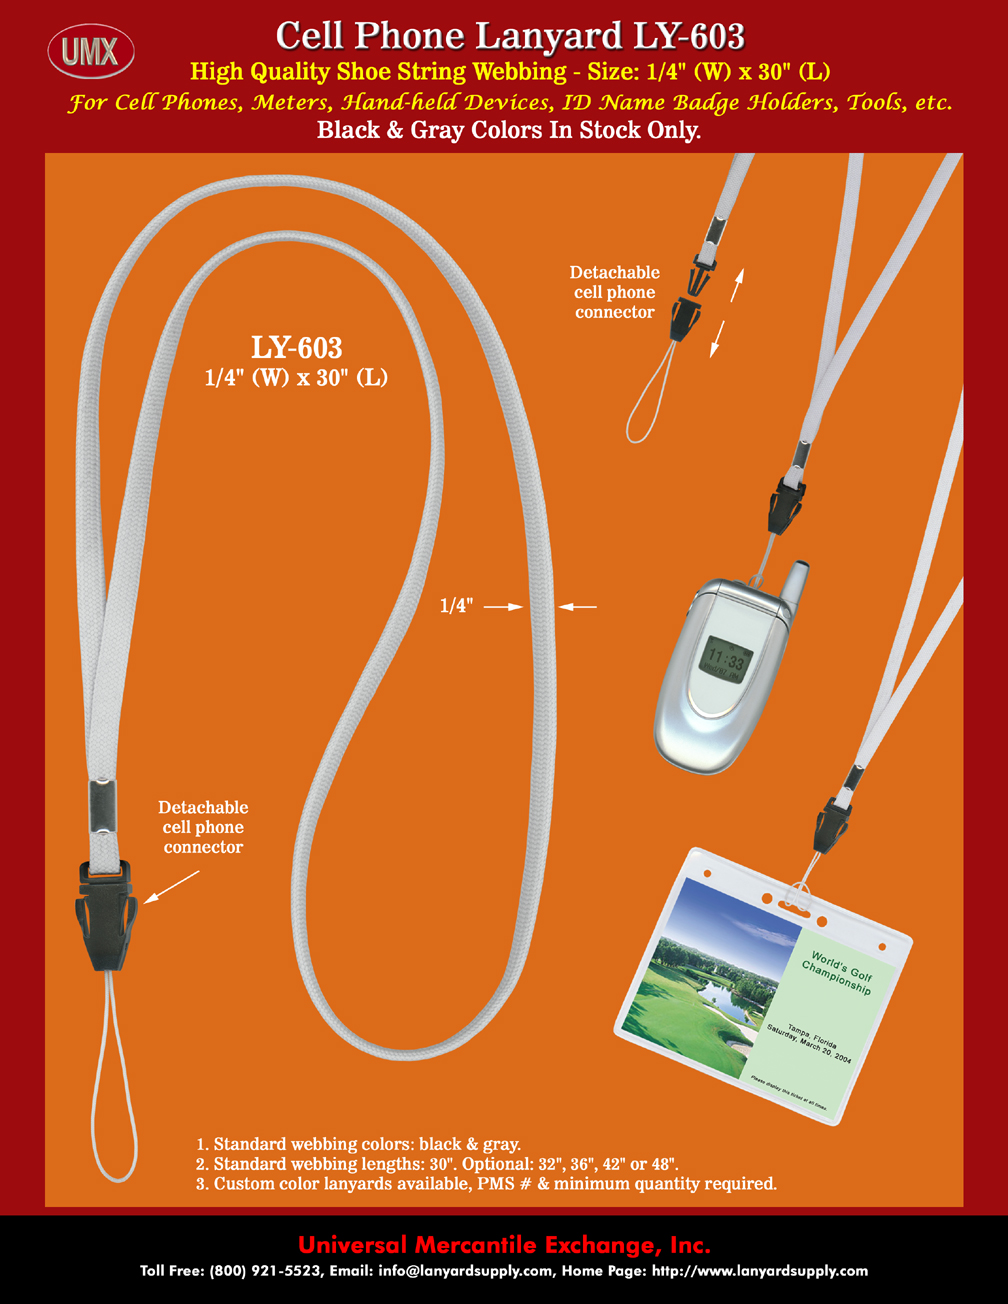 Detachable Lanyards: For Cell Phone, Camera, Camcorder, Electronic Device, Tool, Computer Accessory or ID Holder Lanyard System